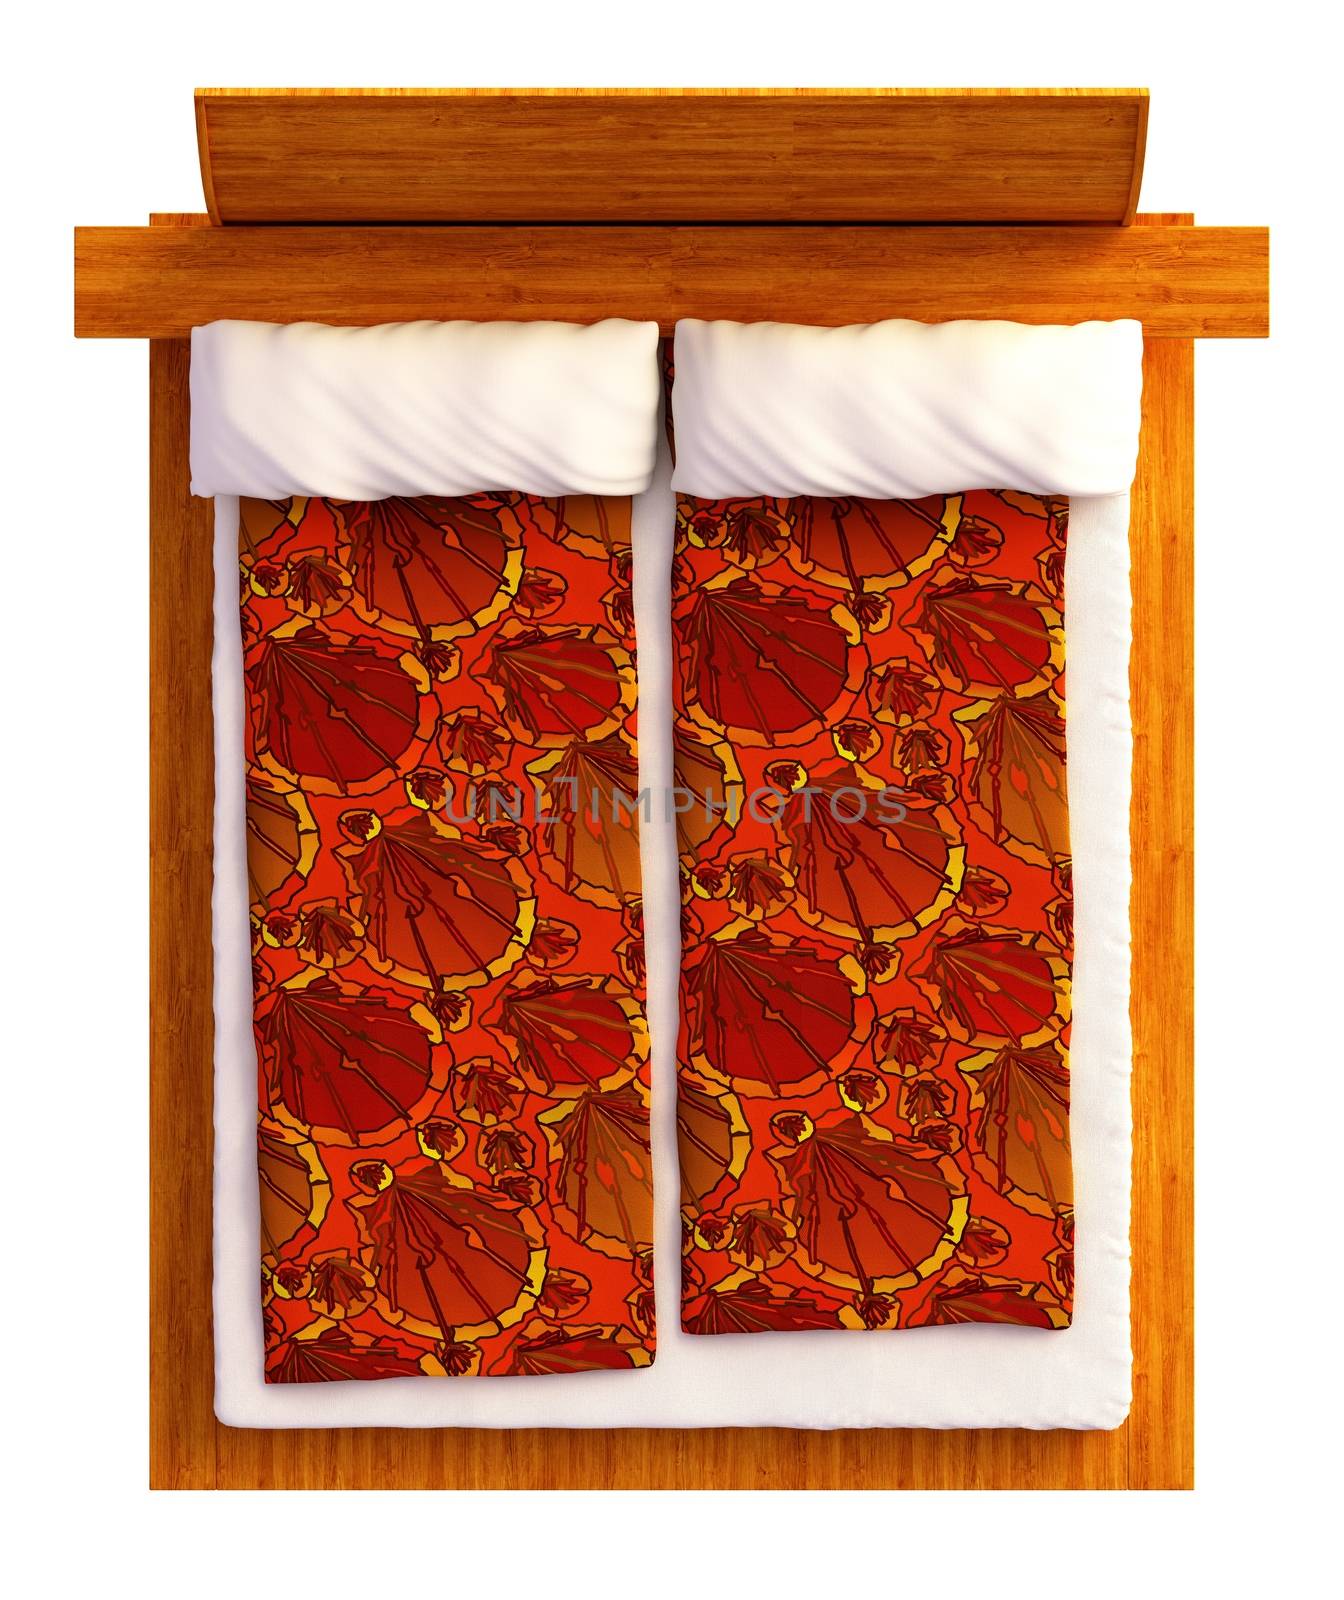 Top view of a bed with a blanket and a pillow isolated on white.